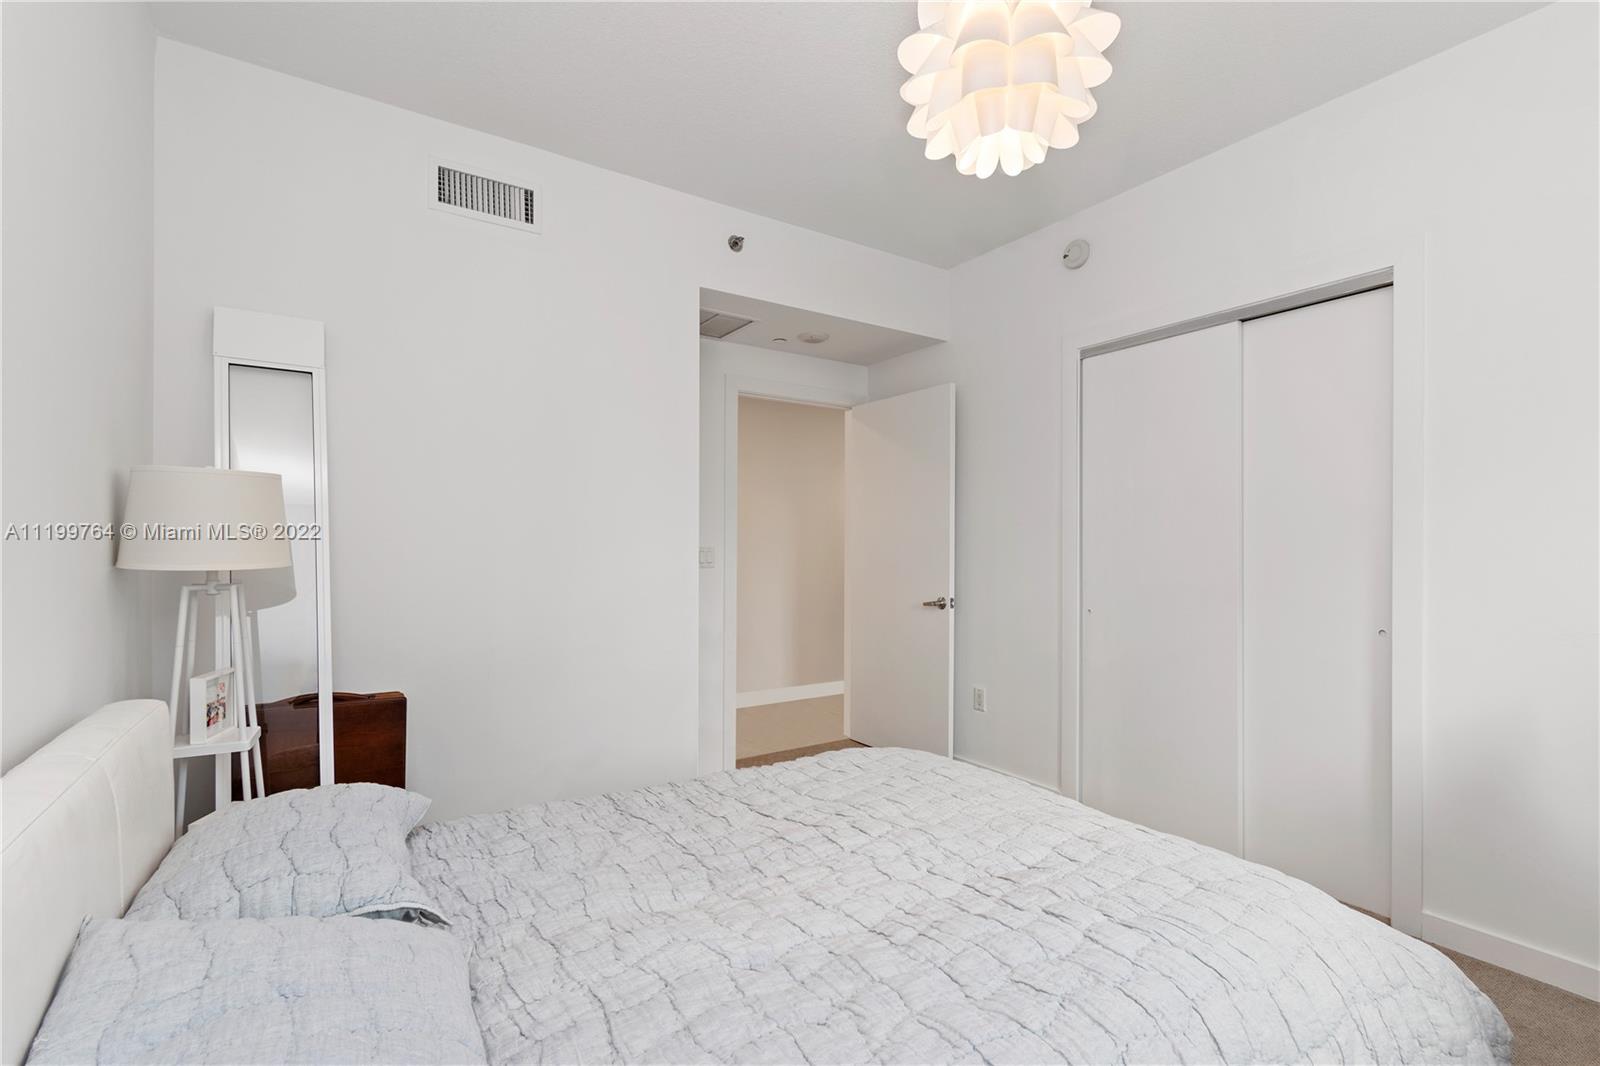 Well distributed floorplan with natural light. Best location right on Brickell Avenue with restaurants, bars and entertainment in the building. Amenities include: pool, gym, spa, virtual golf, yoga room and lounge. Unit is rented until July -2023.